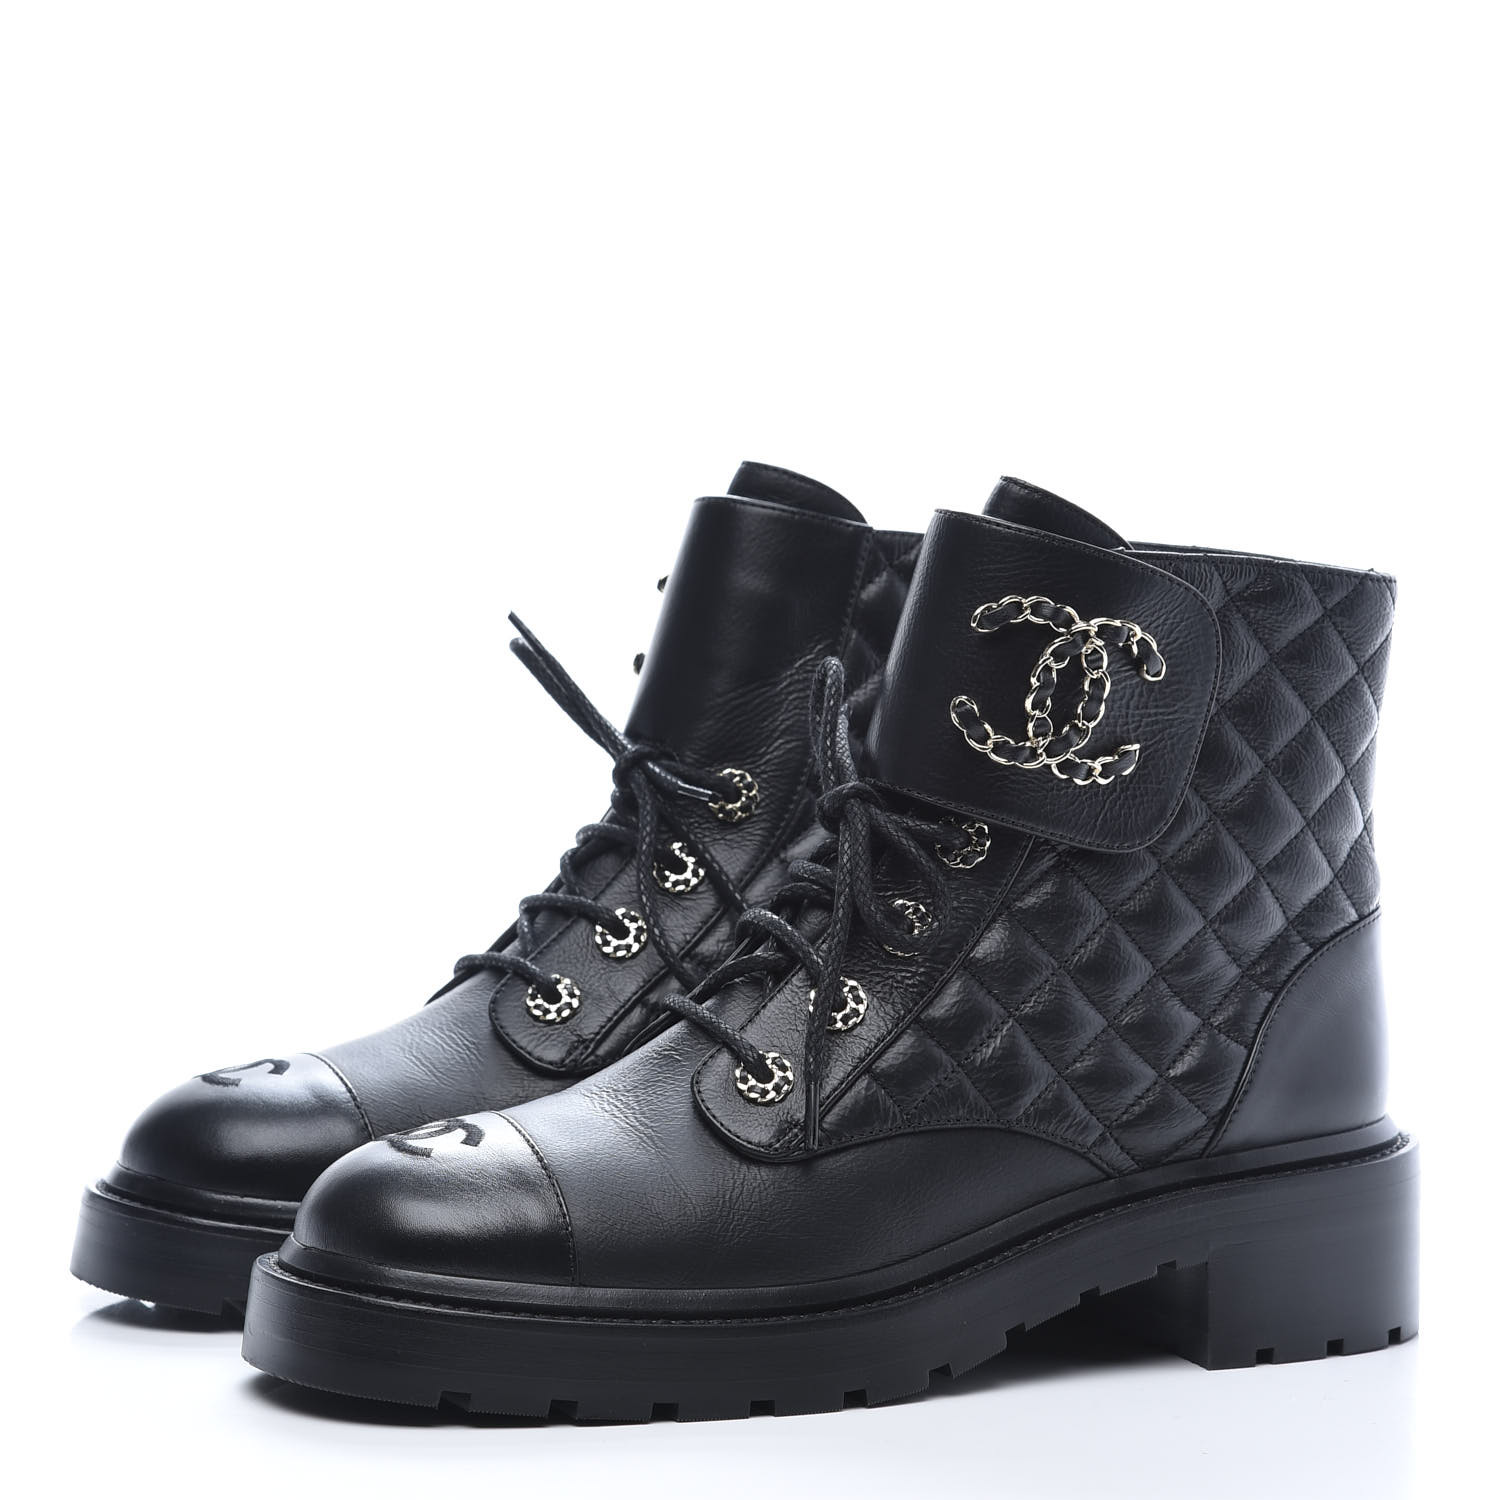 CHANEL Shiny Goatskin Calfskin Quilted Lace Up Combat Boots 40.5 Black ...